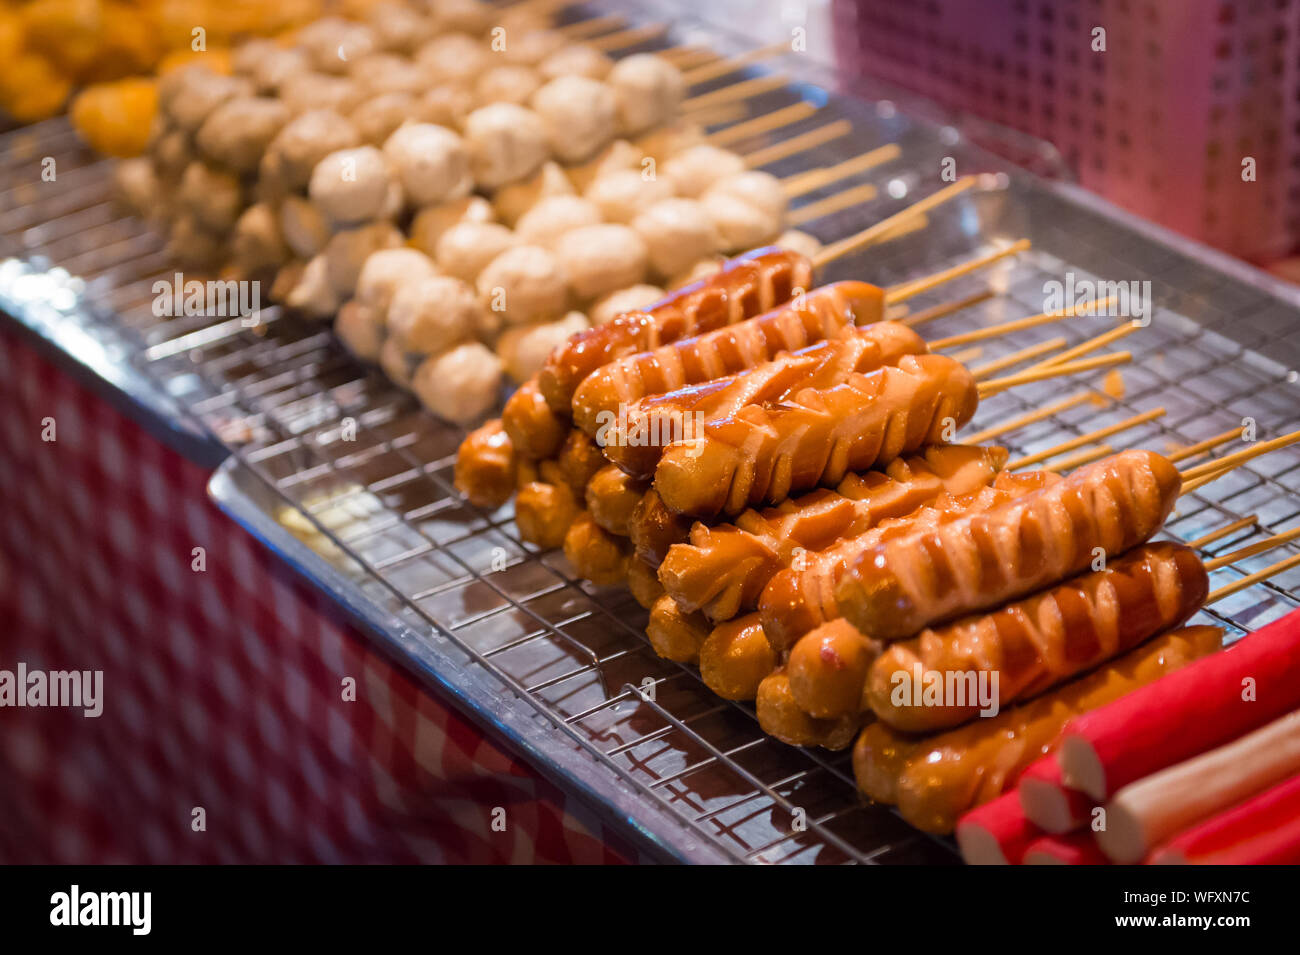 High Angle View Of Barbecued Sausages On Metal Grate Stock Photo